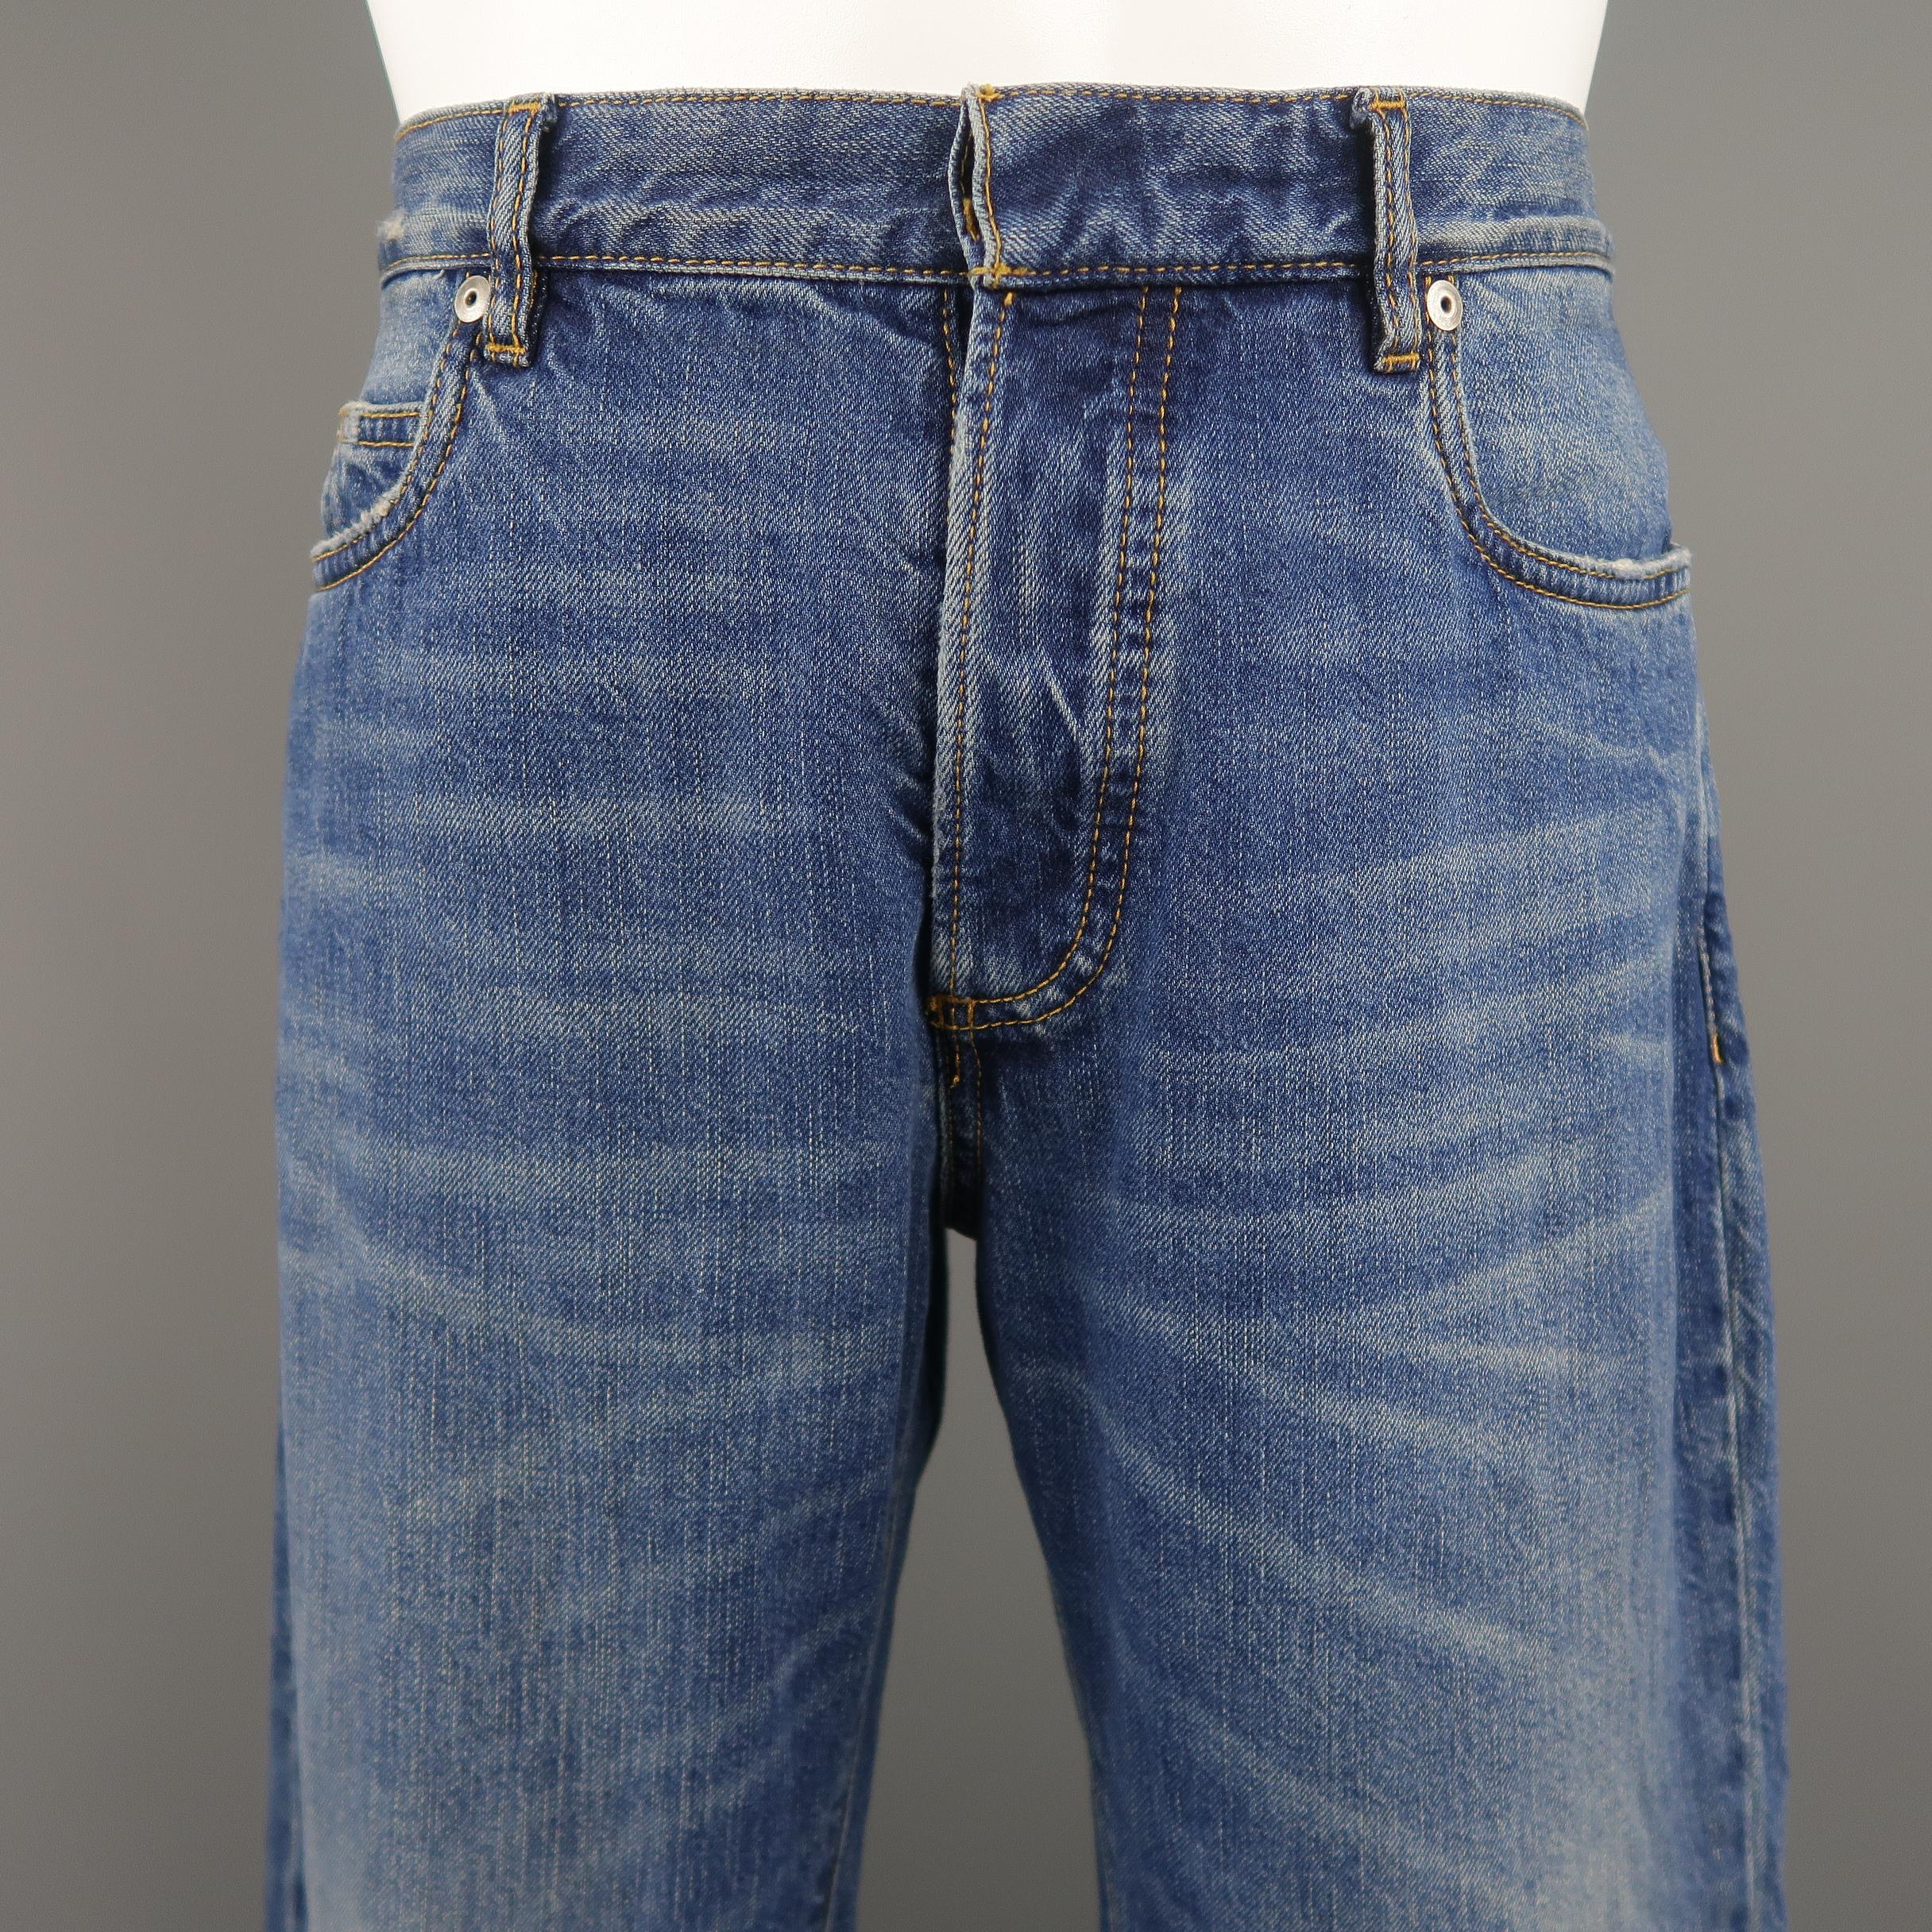 MAISON MARTIN MARGIELA slim fit jeans come in medium washed denim with distressed details, hidden placket button fly, and signature stitch detail at back. Made in Italy.
 
Excellent Pre-Owned Condition.
Marked: 32
 
Measurements:
 
Waist: 34